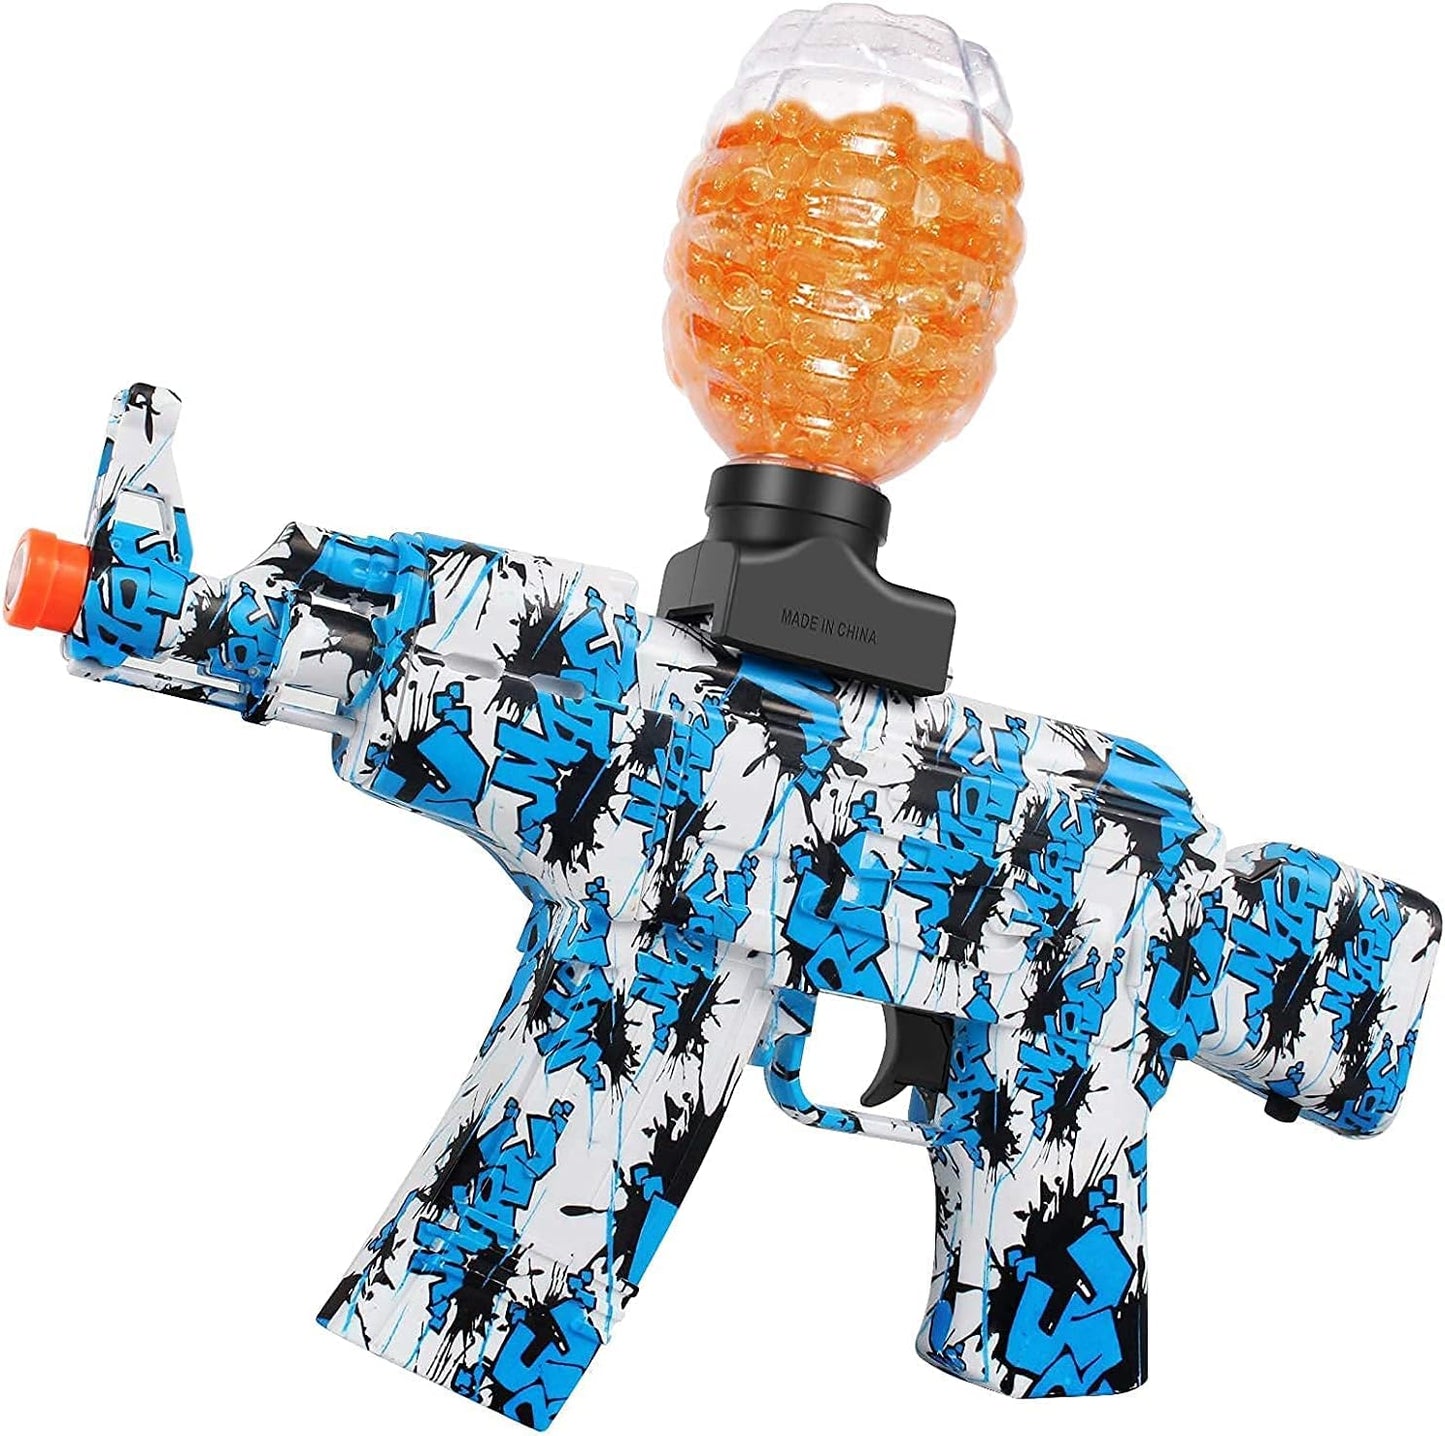 Anstoy Electric with Gel Ball Blaster AEG AKM-47 Splatter Ball Blaster for Splat Gun Automatic Outdoor Activities-Christmas Team Game, Ages 14+